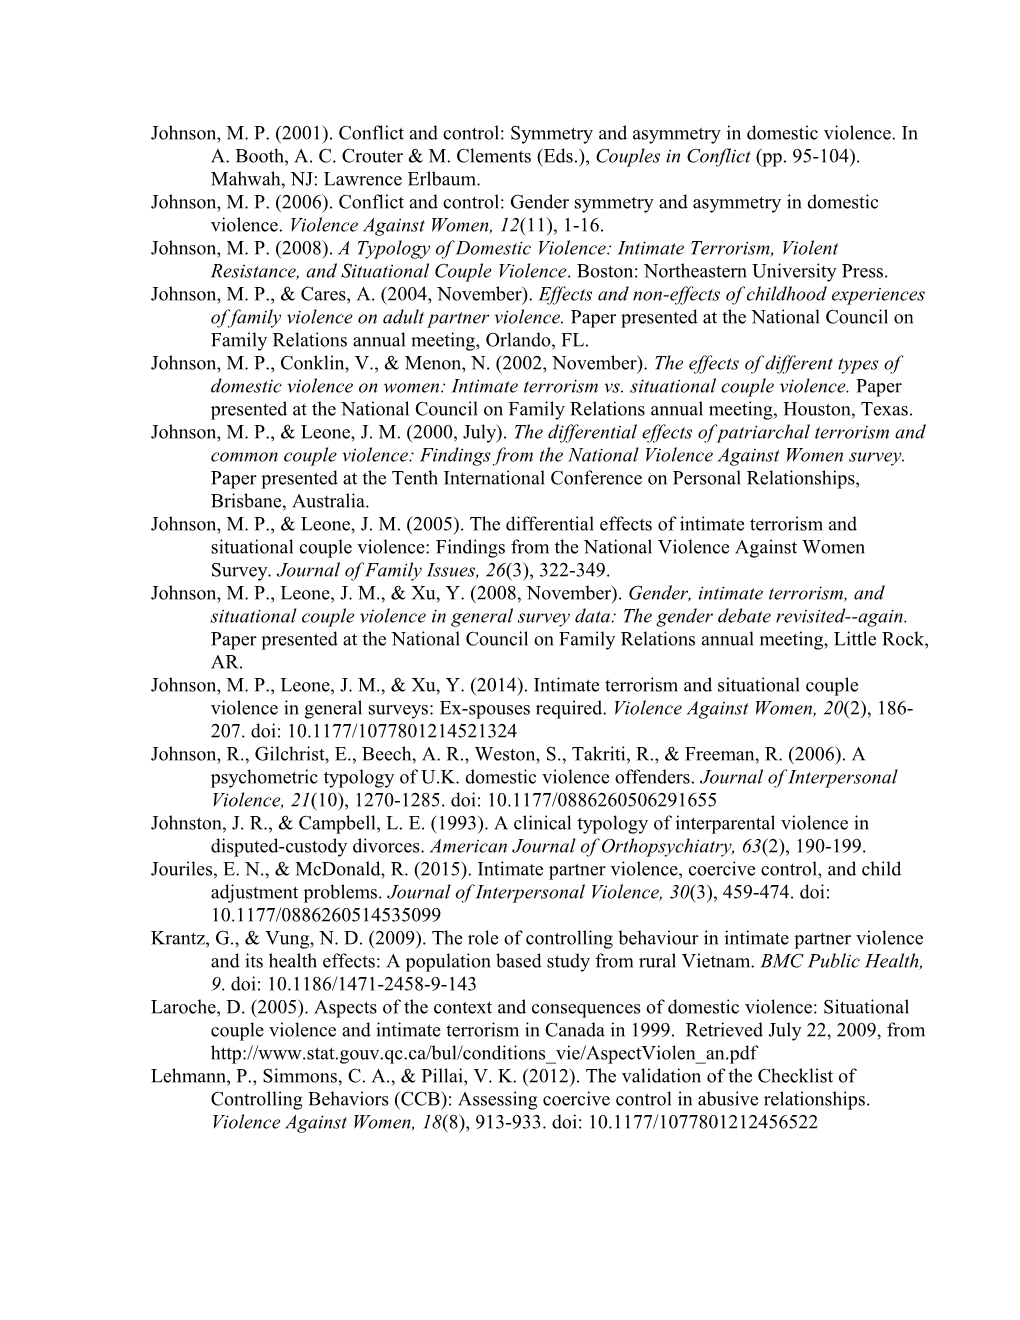 Bibliography of Empirical Papers Addressing the Typology